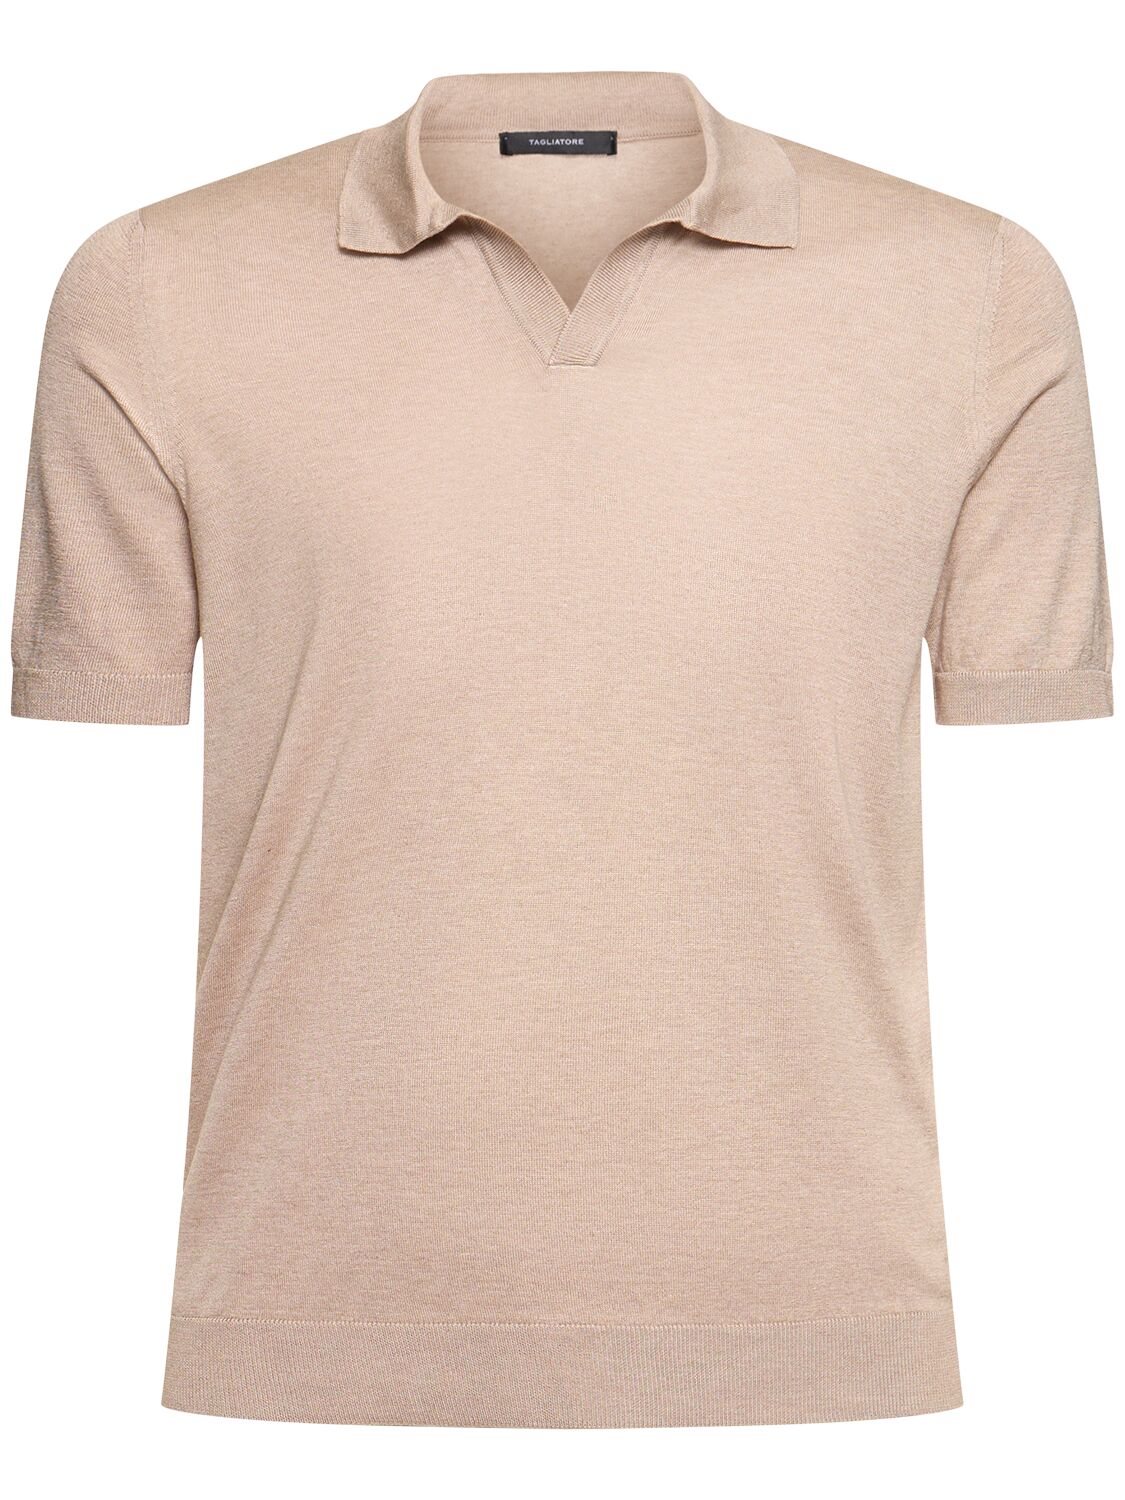 Image of Keith Silk Knit Polo